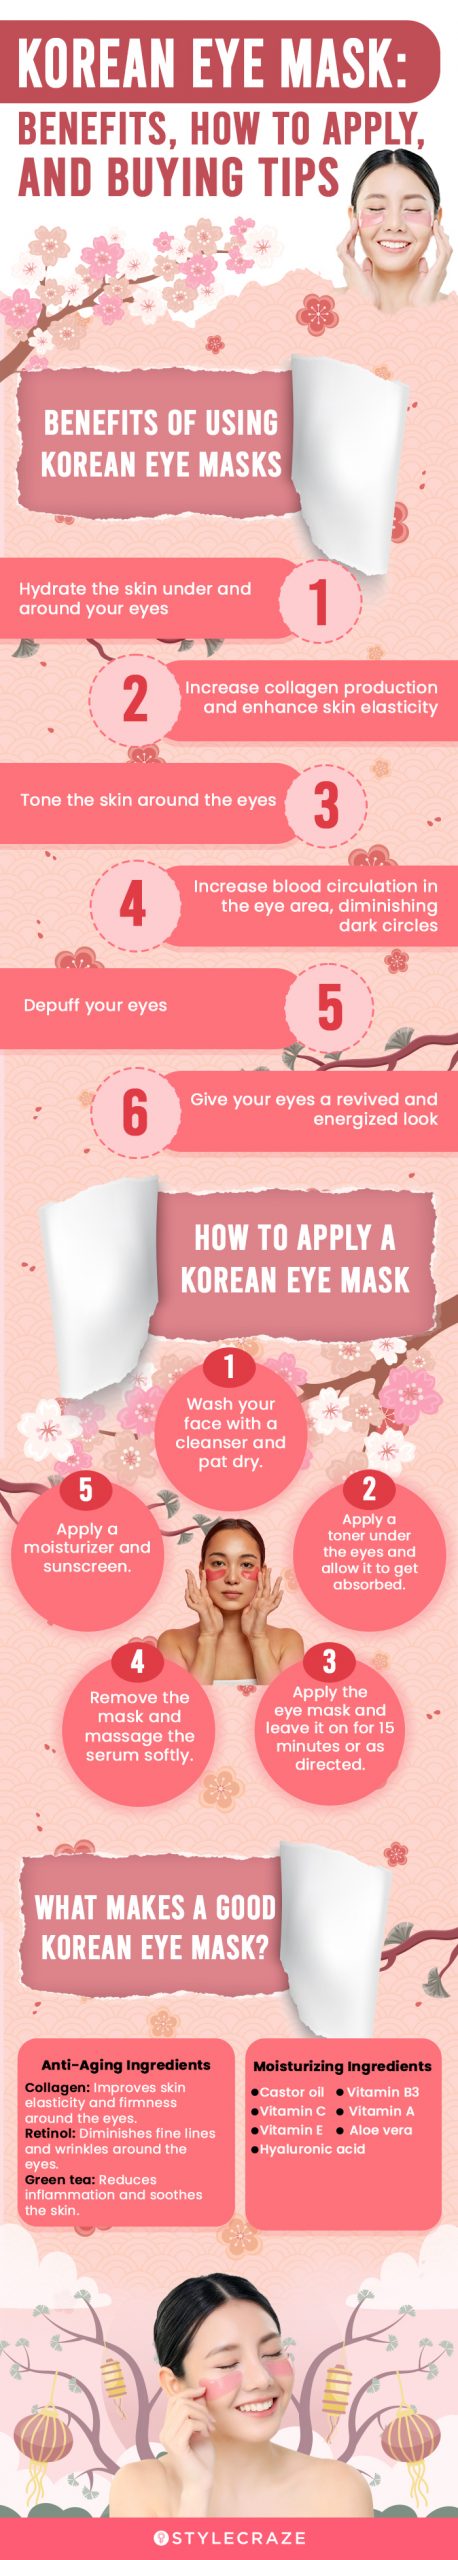 Korean Eye Mask: Benefits, How To Apply, And Buying Tips [infographic]